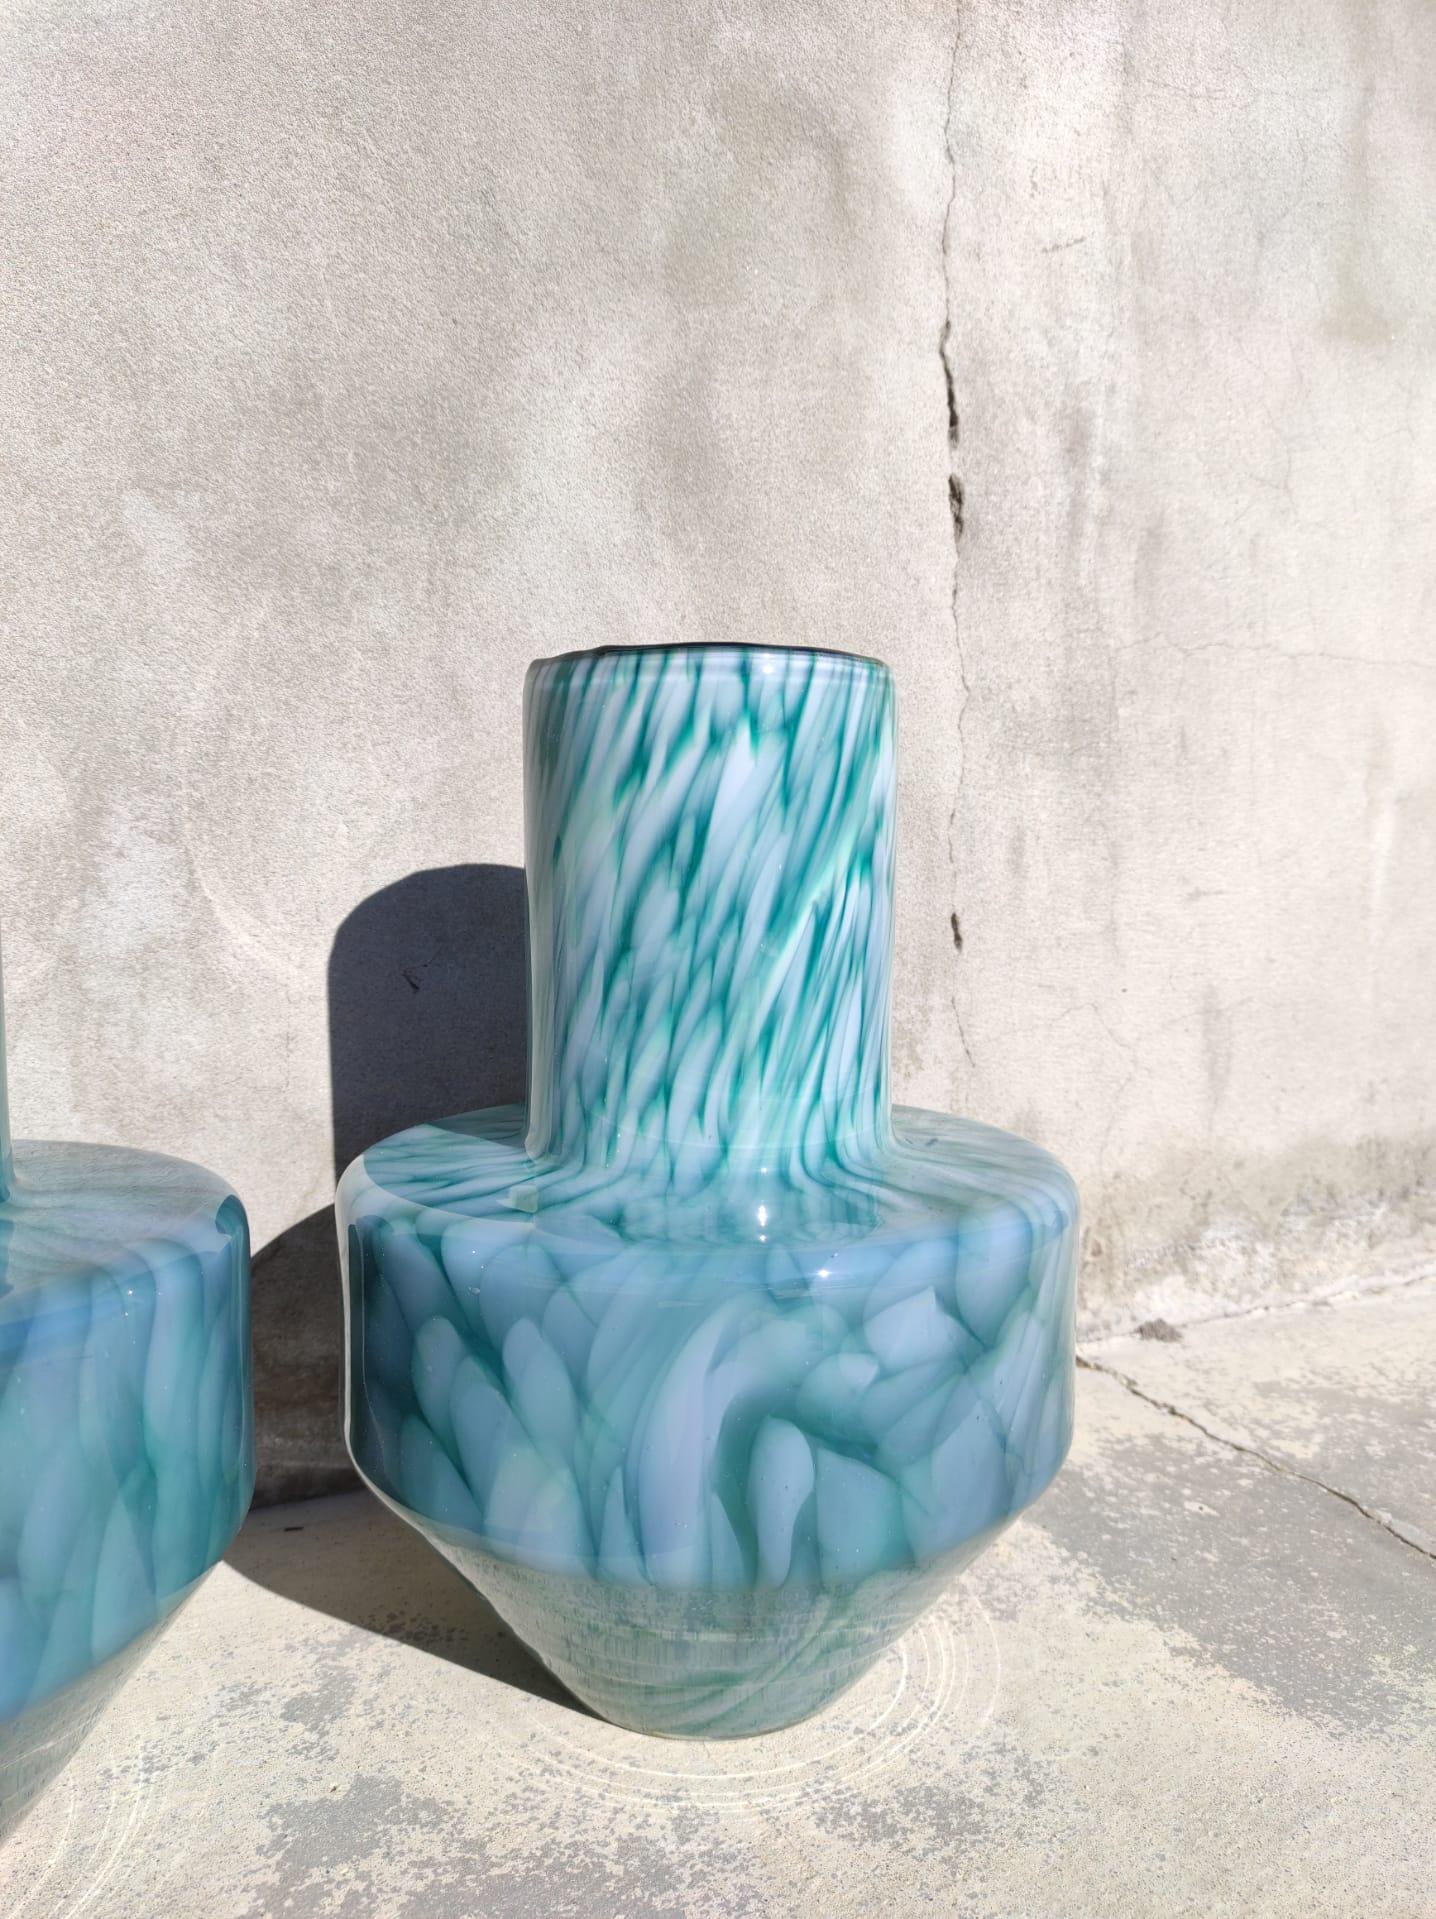 In May 2016 Marie-Victoire Winckler starts her TOTEM collection of vases and suspension lamps. She begins her research in Tunisia where she founds very textured blown glass and traditional ceramics, but it is in Portugal that she is producing today